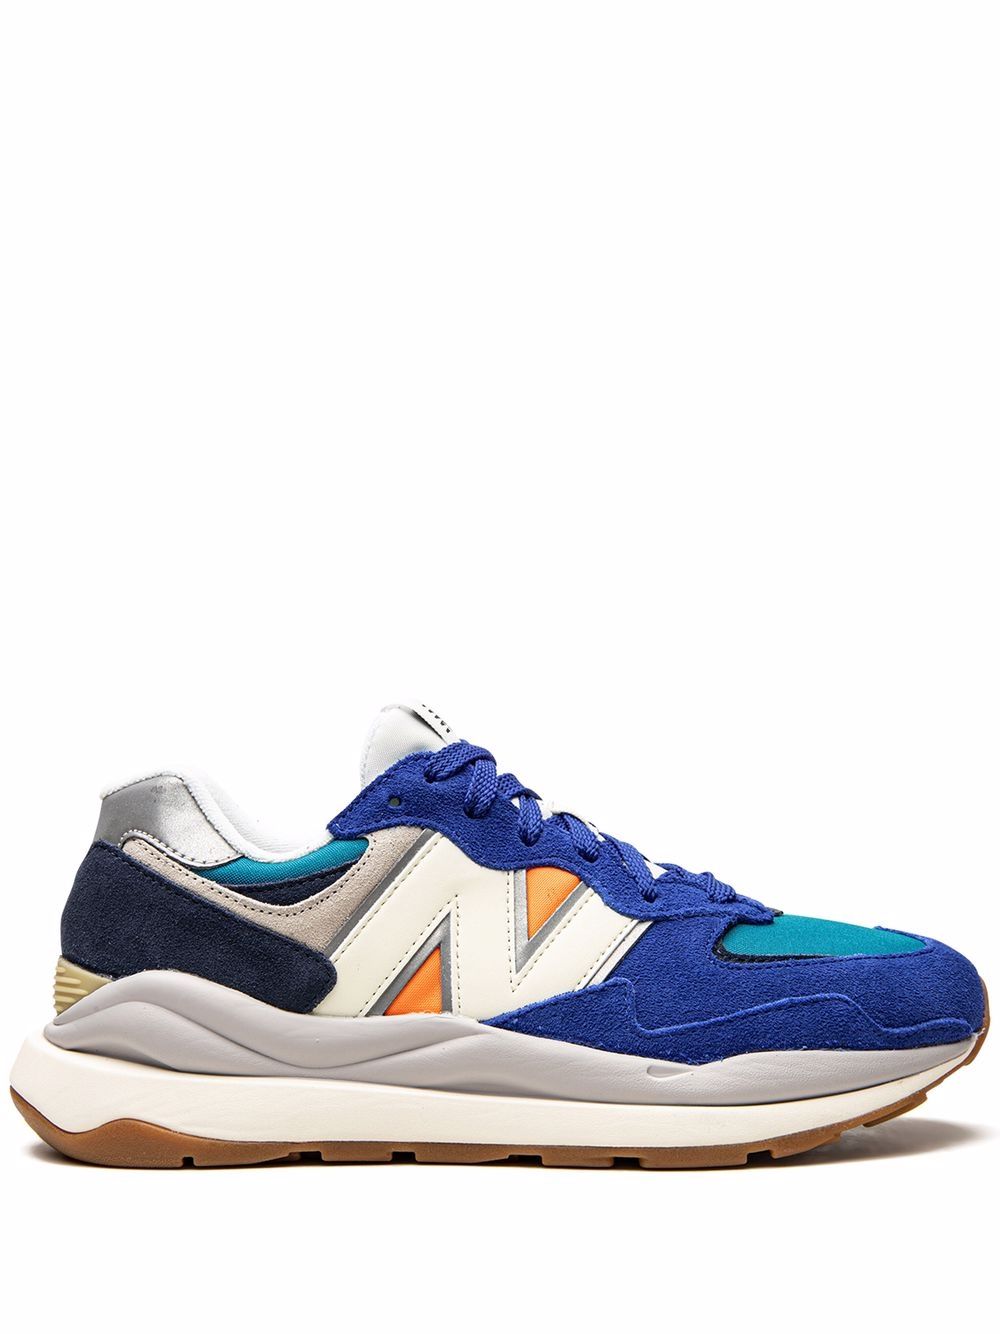 New Balance 57/40 low-top sneakers - Blue